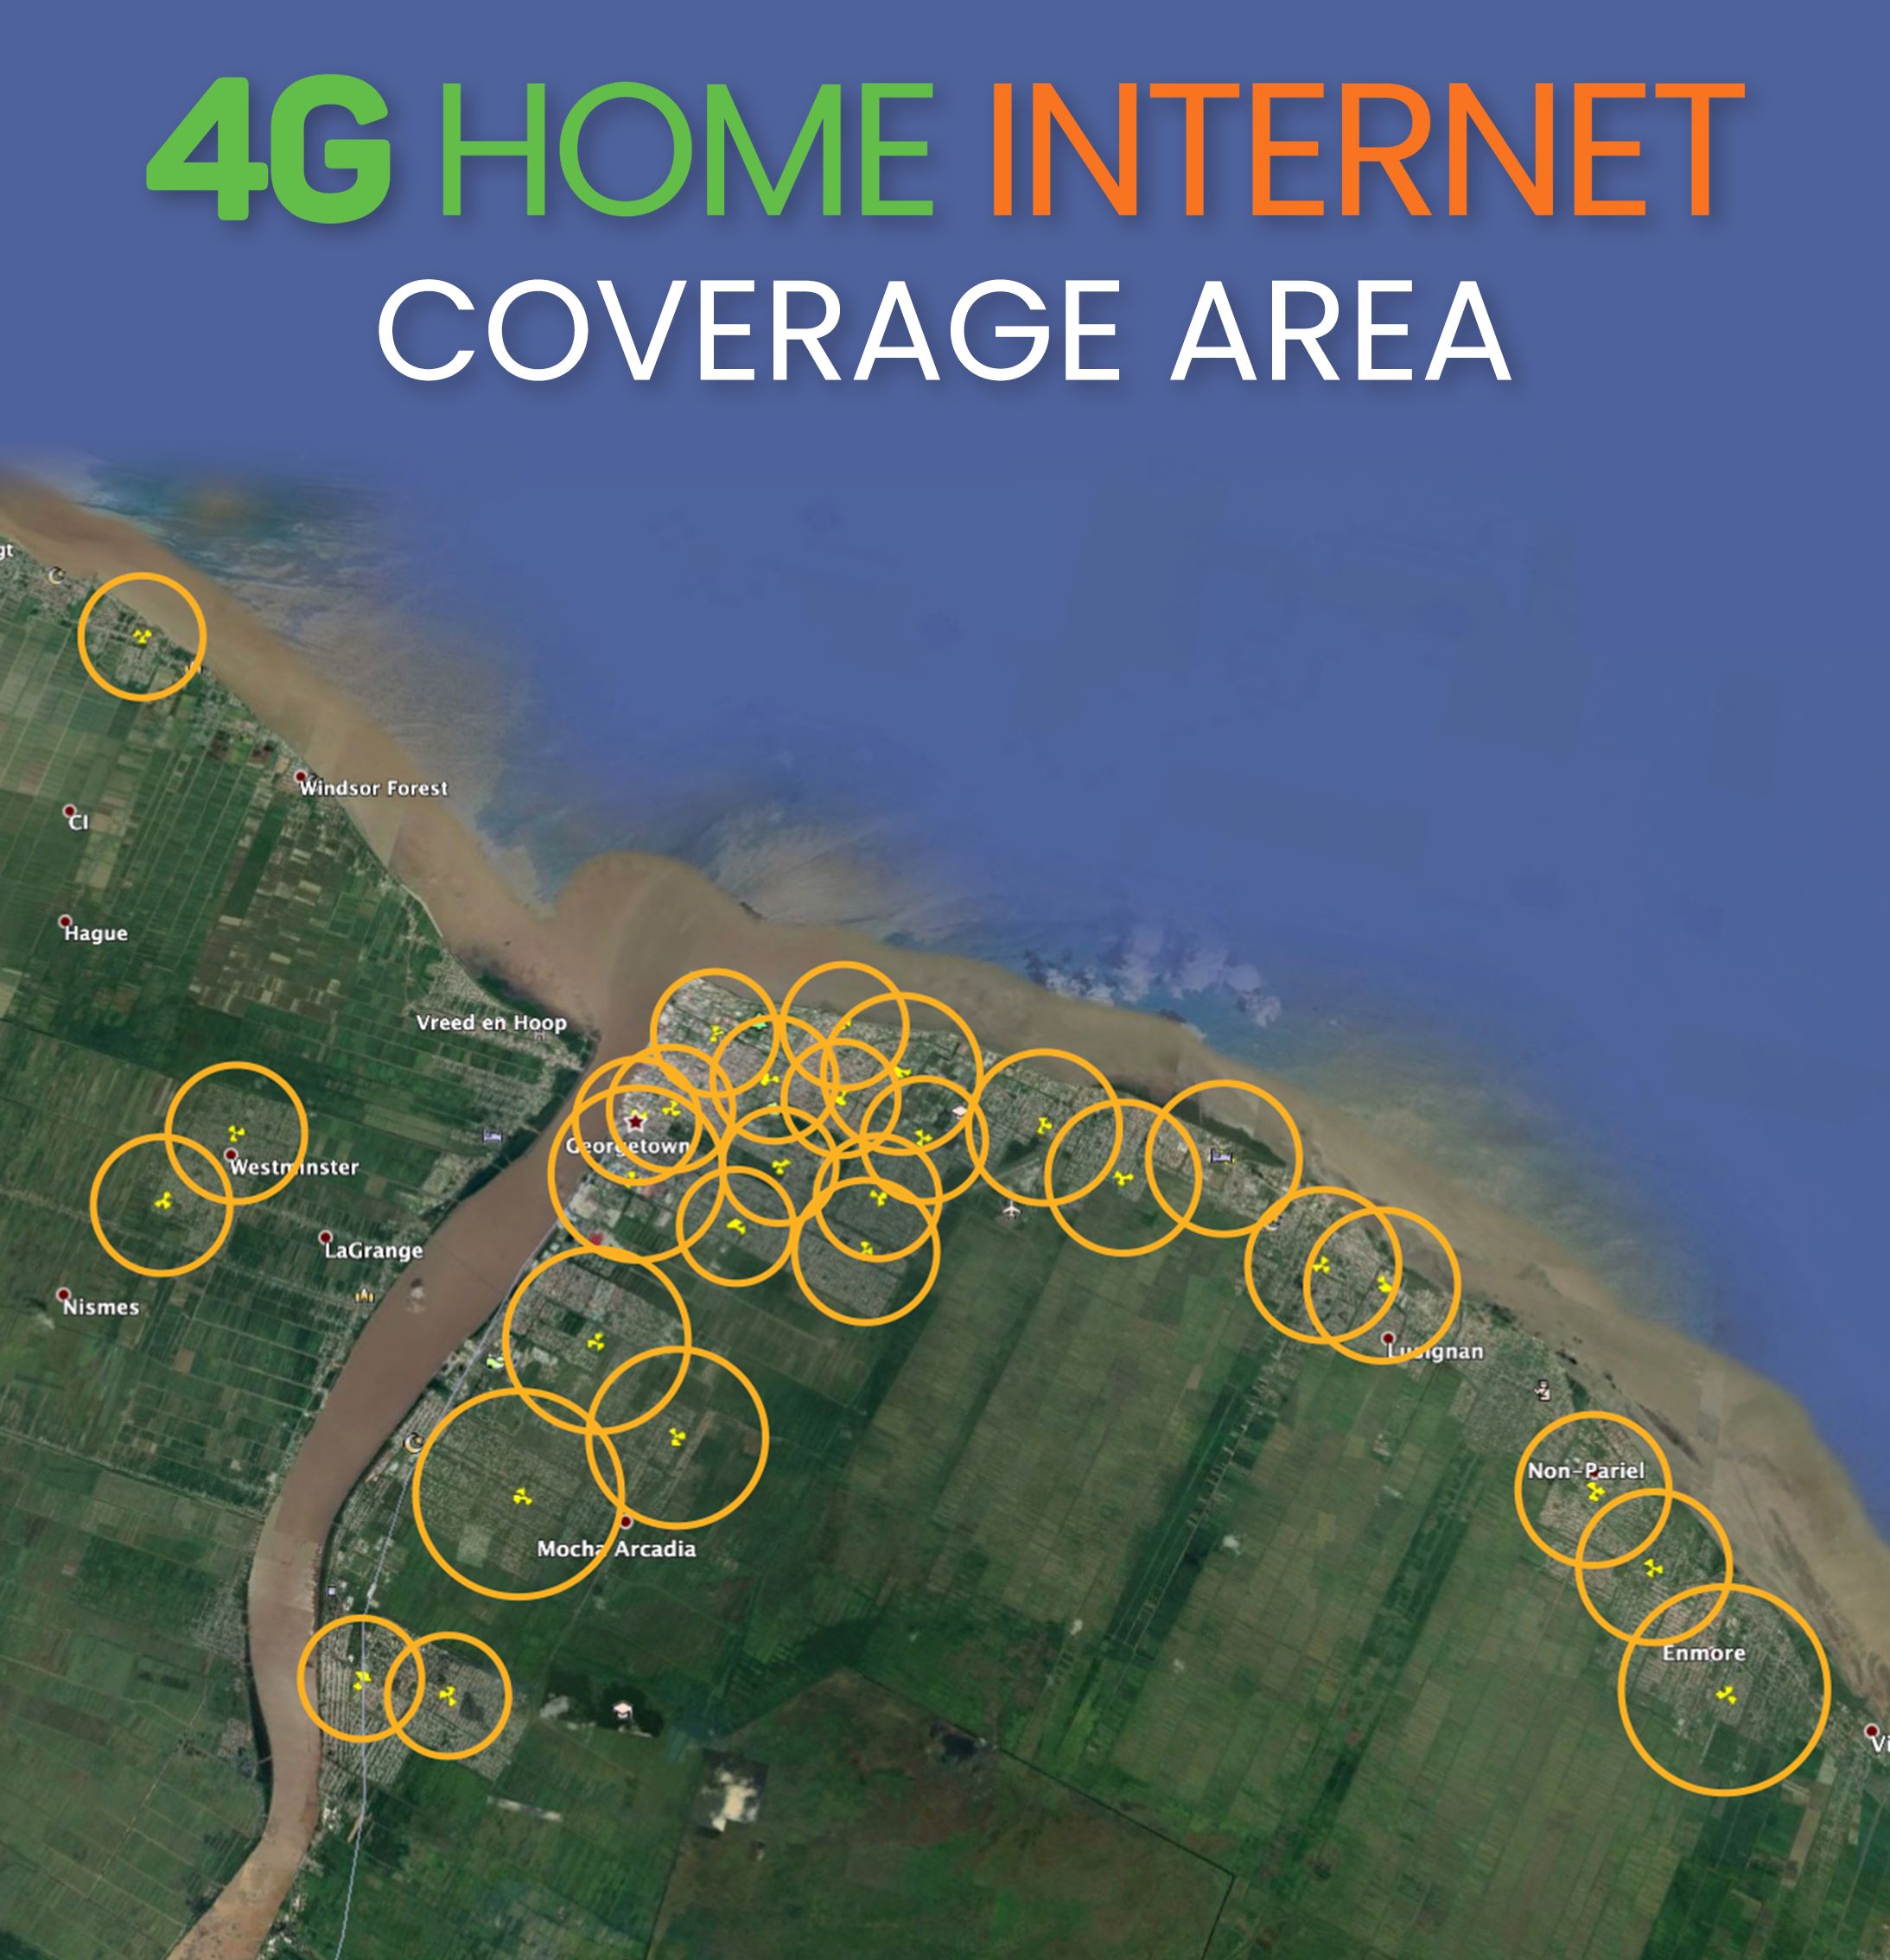 4G COVERAGE AREA MAP 